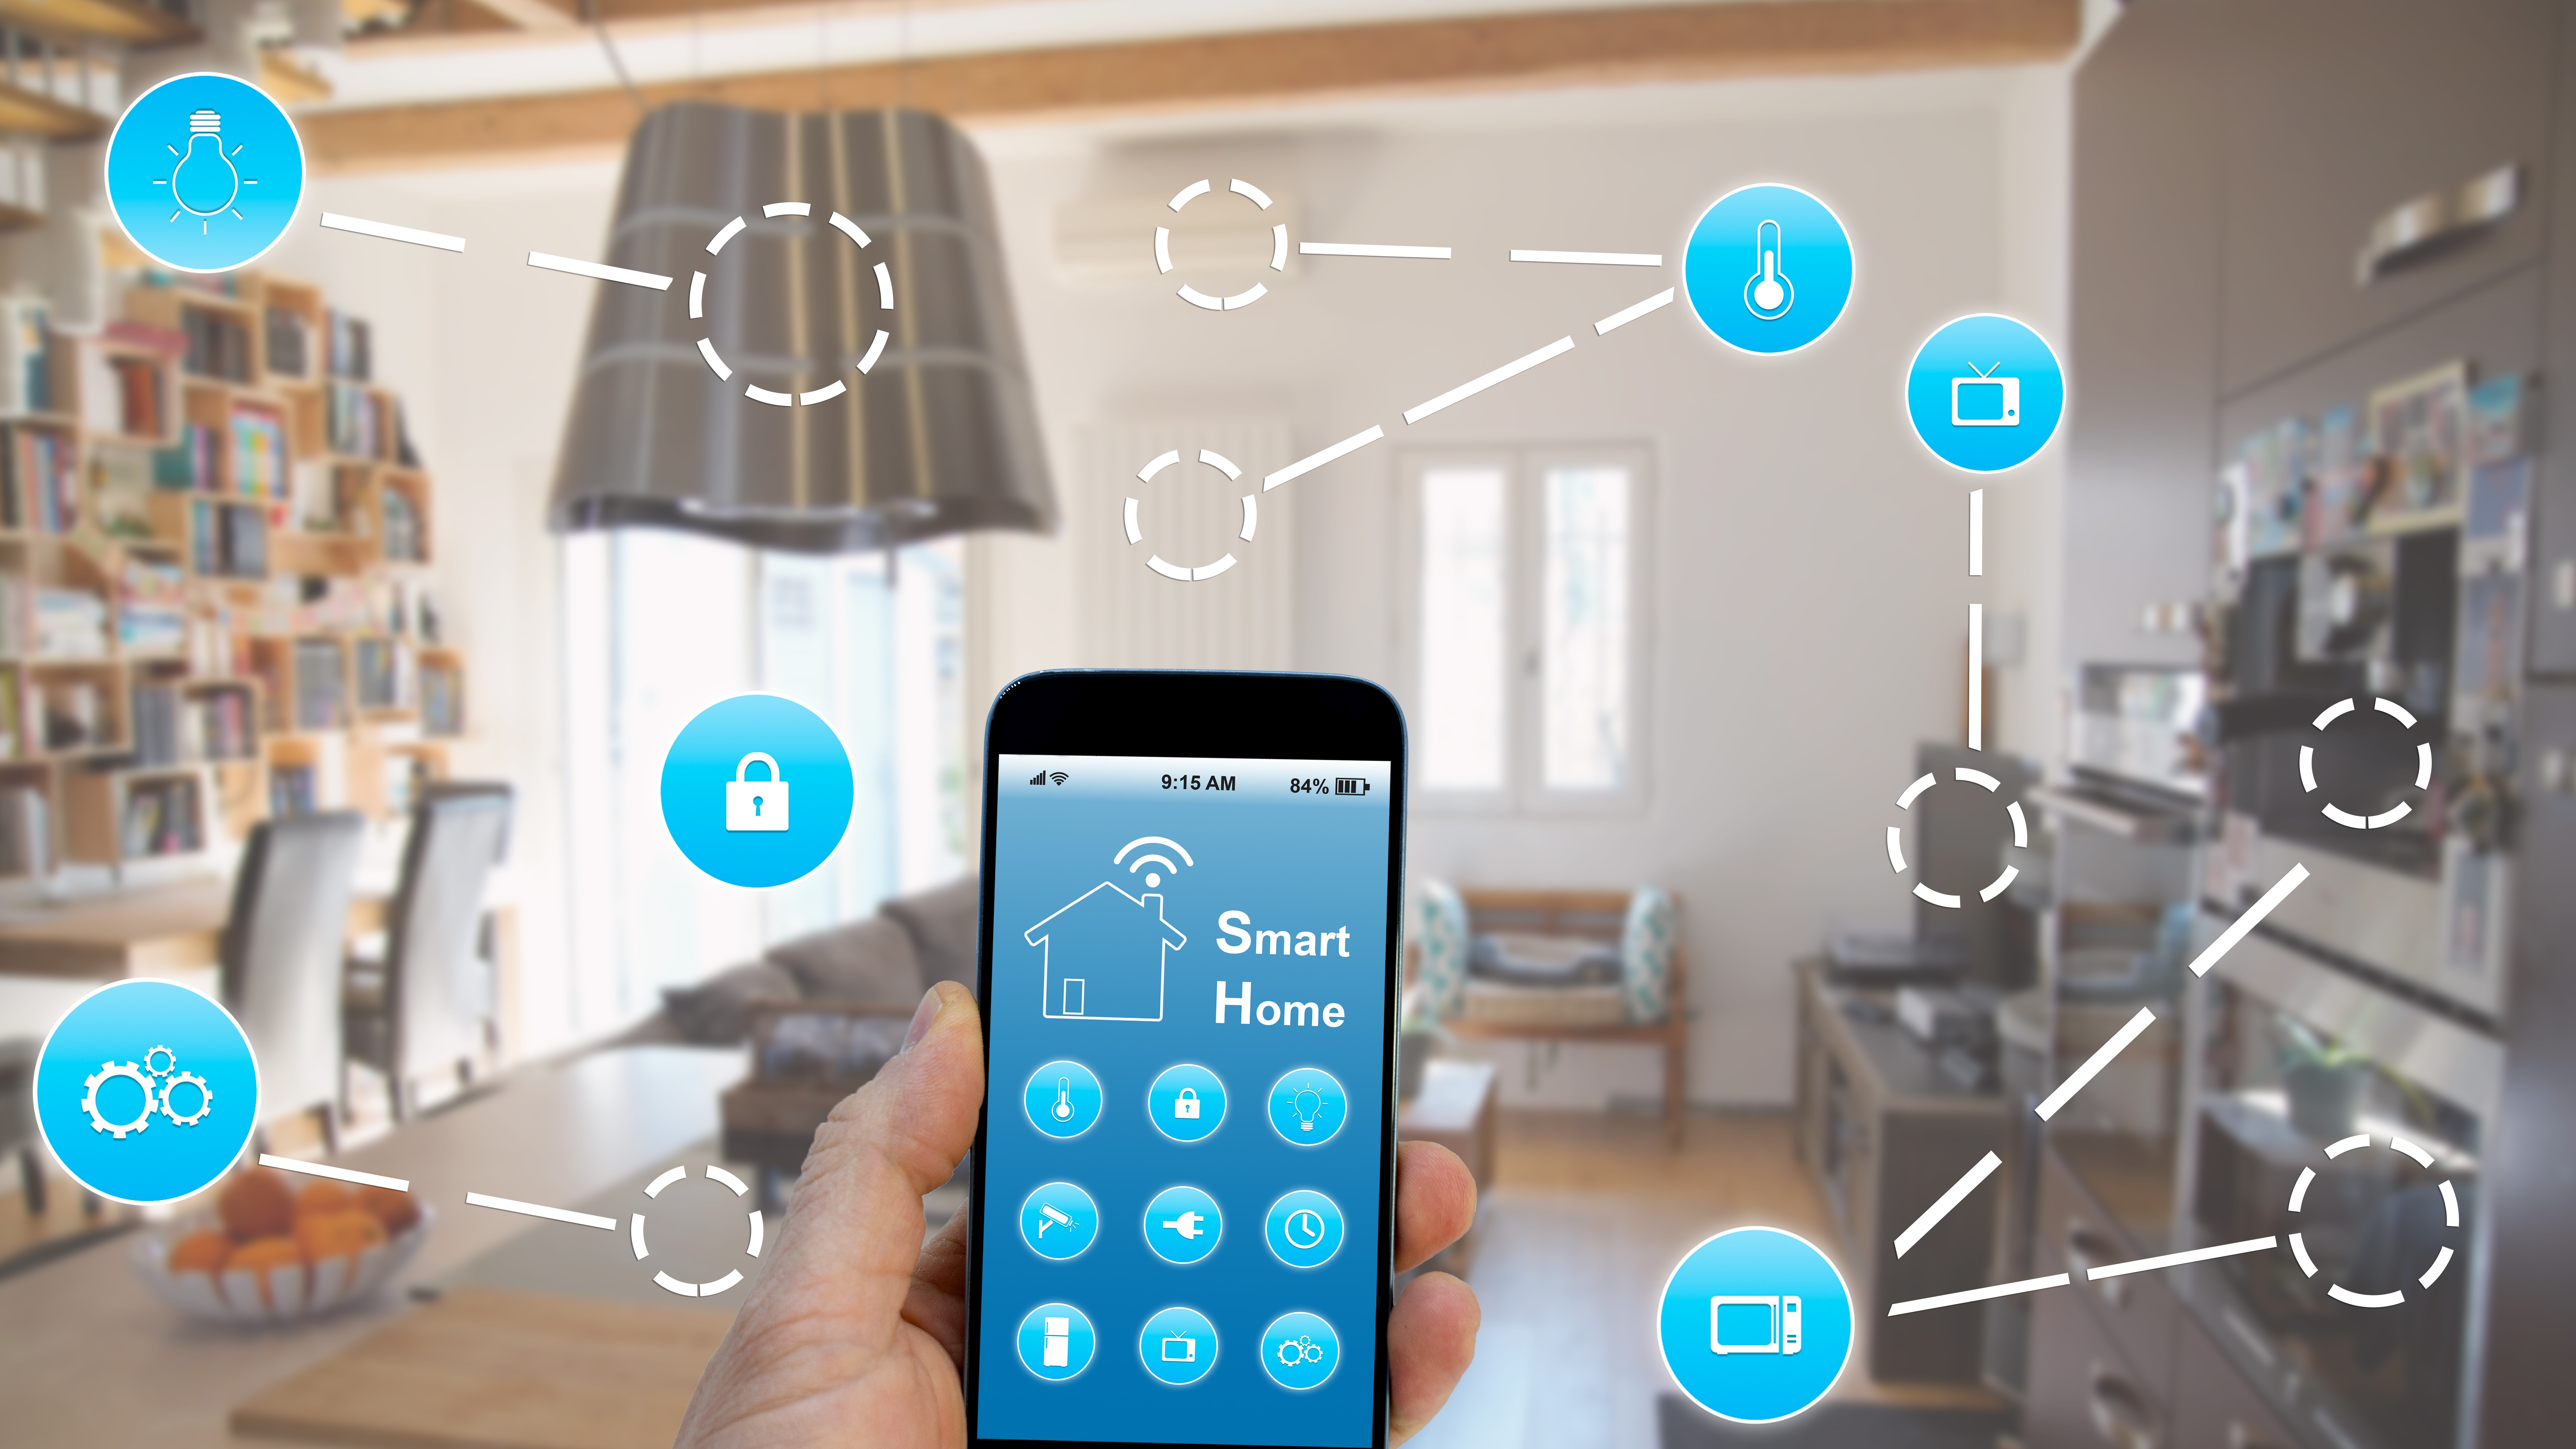 Smart home devices are being hit with more cyberattacks